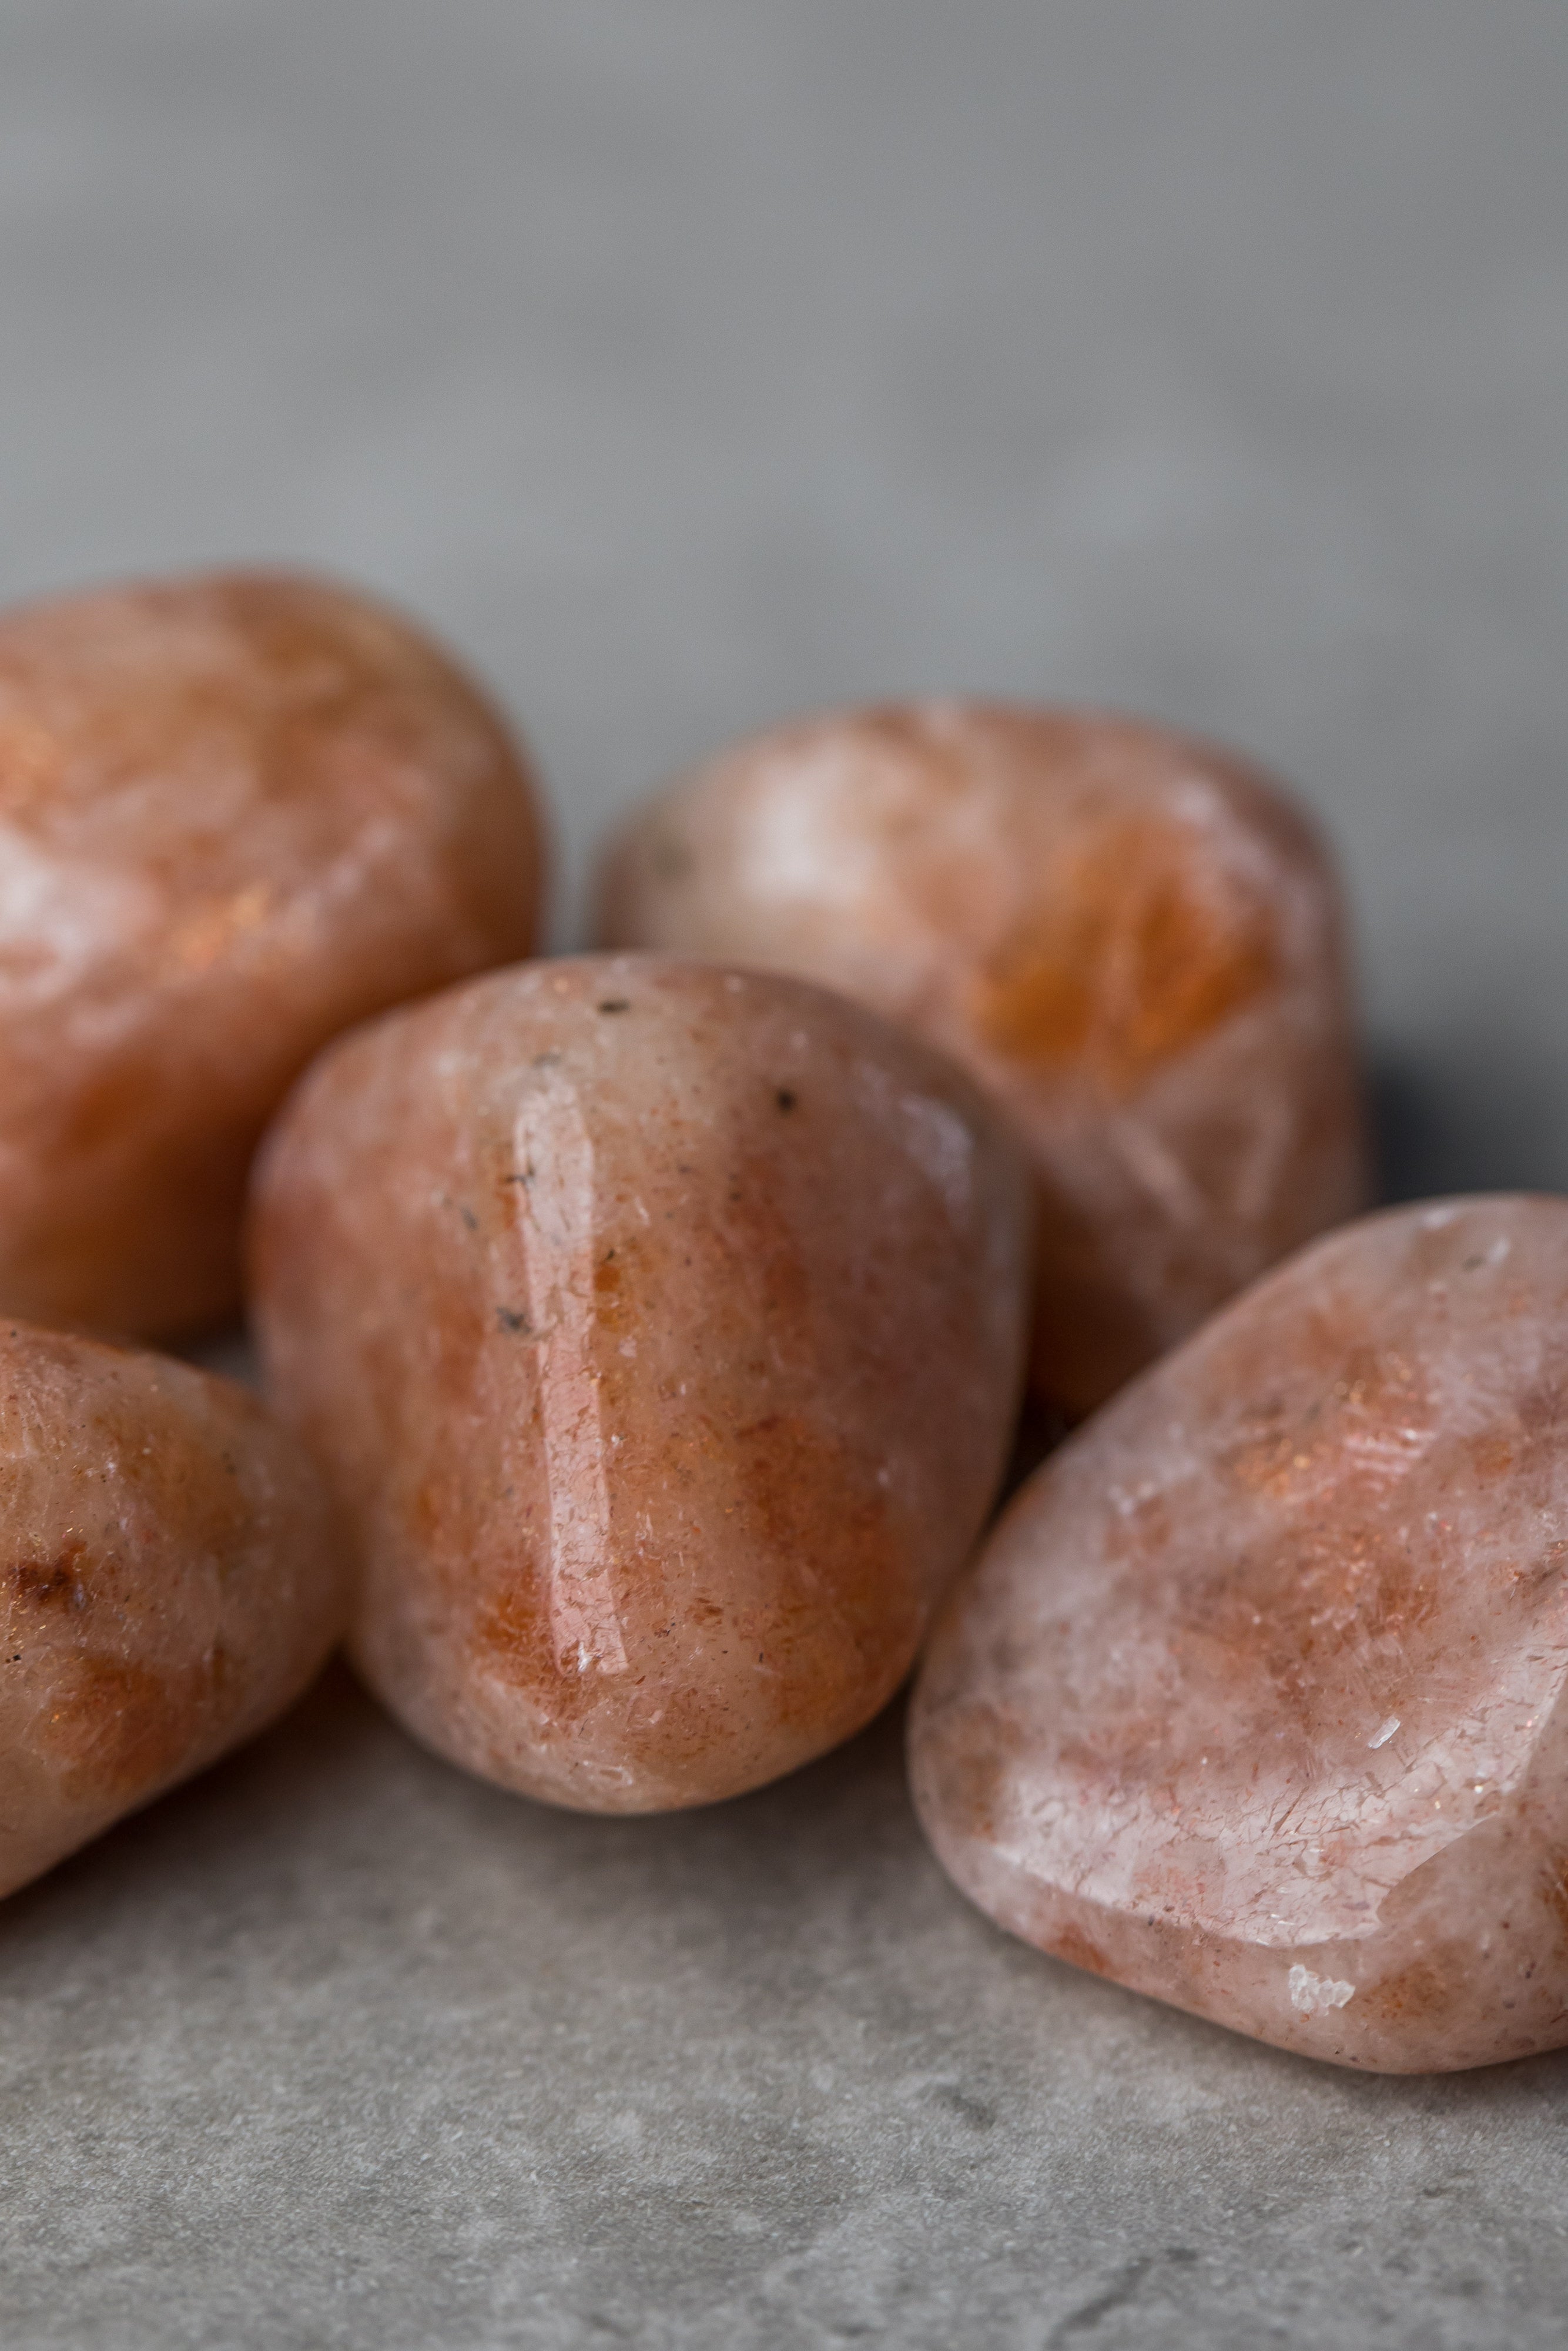 Sunstone - Radiant Crystal for Optimism and Personal Power